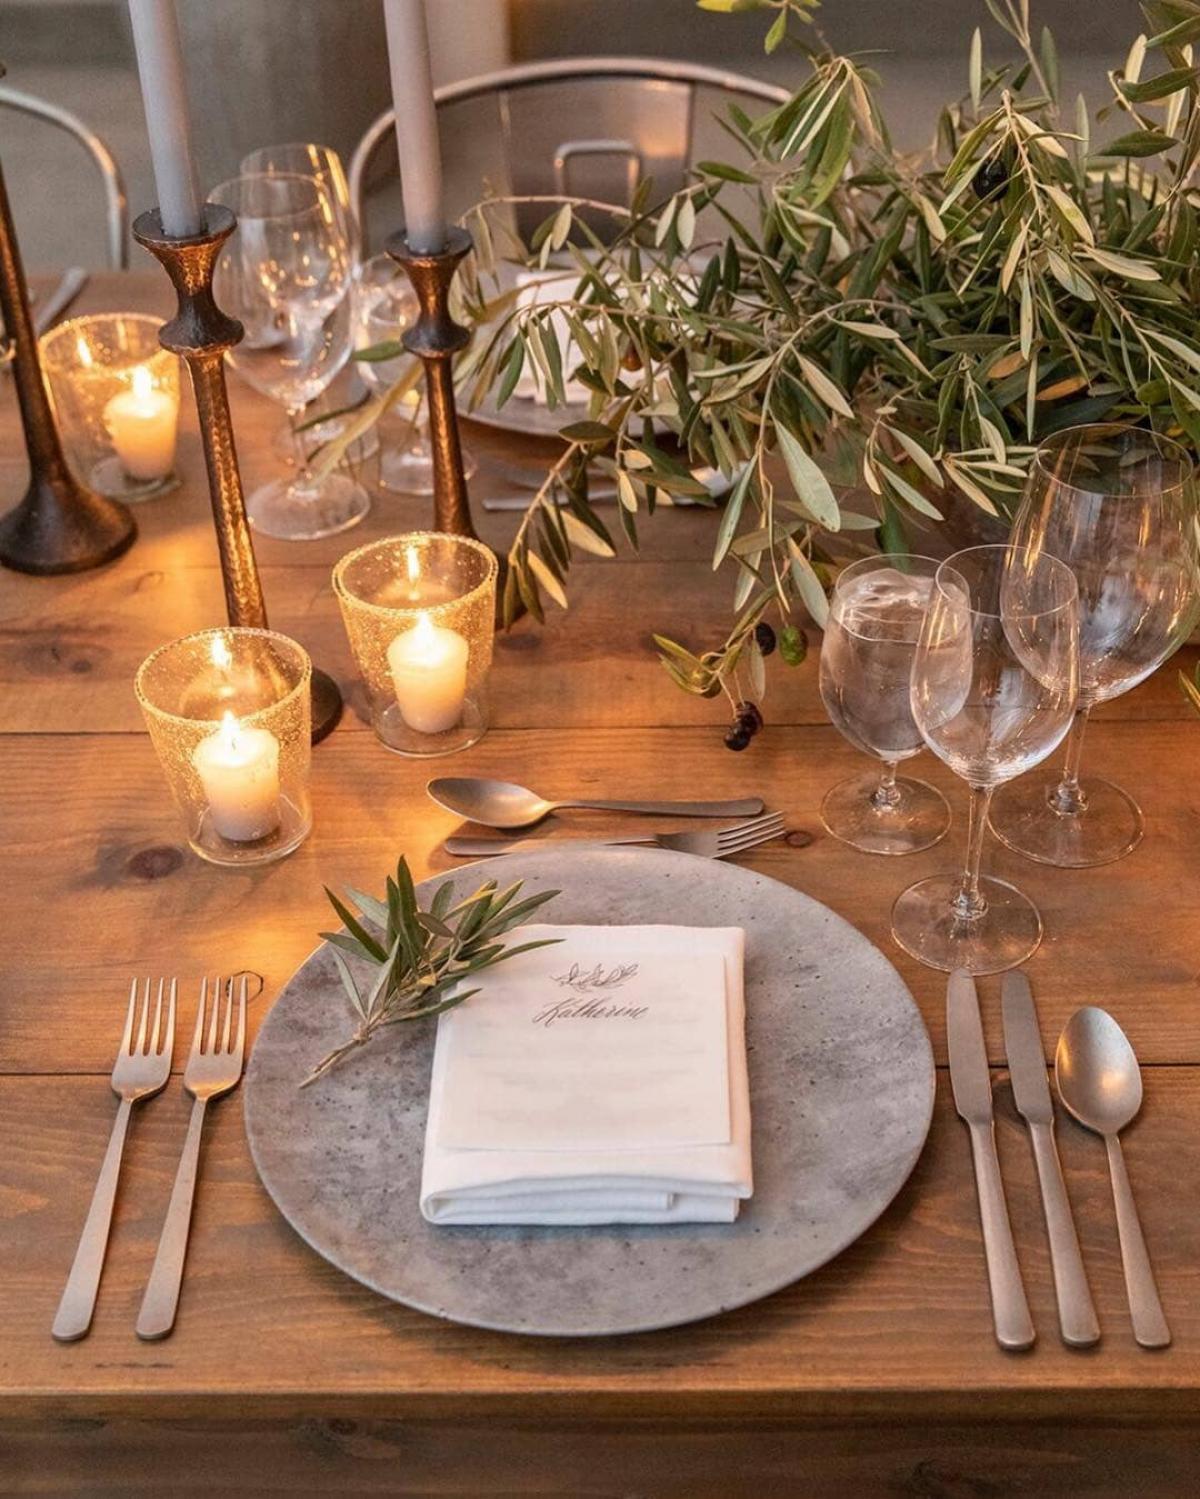 Candlelight Reception Table with Placemat & Menu for a Rehearsal Dinner